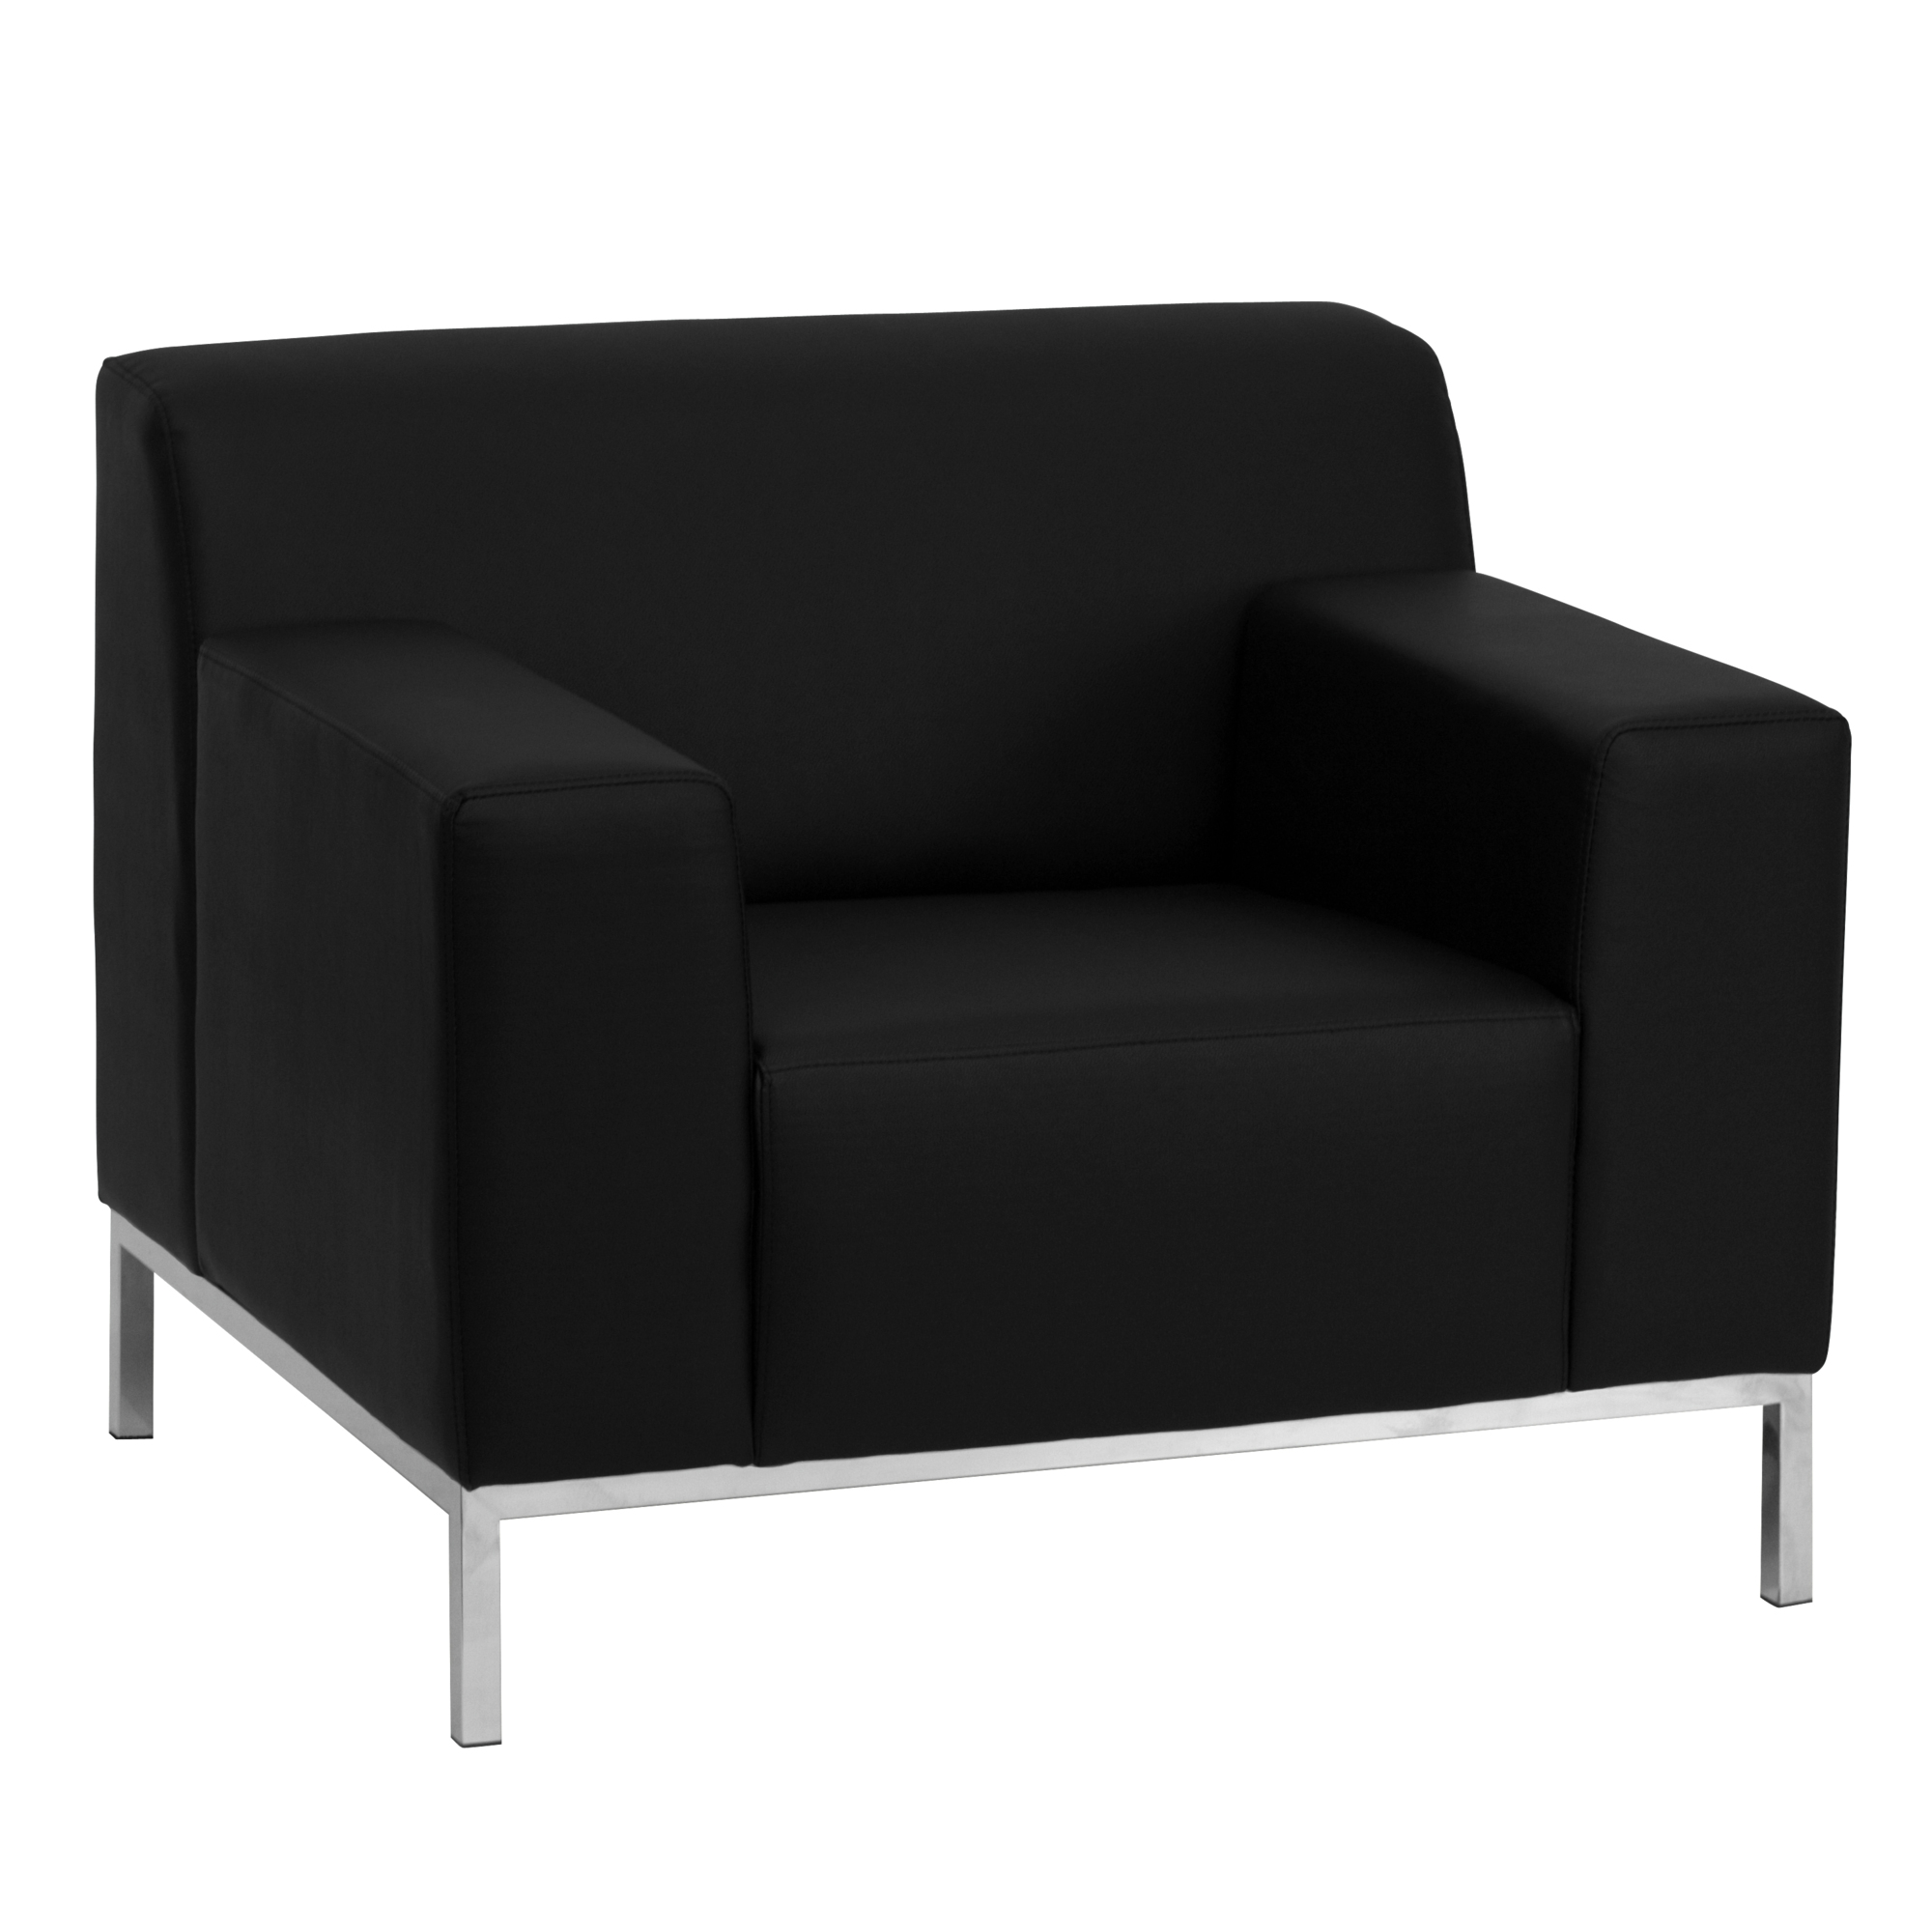 Flash Furniture, Black LeatherSoft Chair with Line Stitching, Primary Color Black, Included (qty.) 1, Model ZBDEFNTY809CHBK